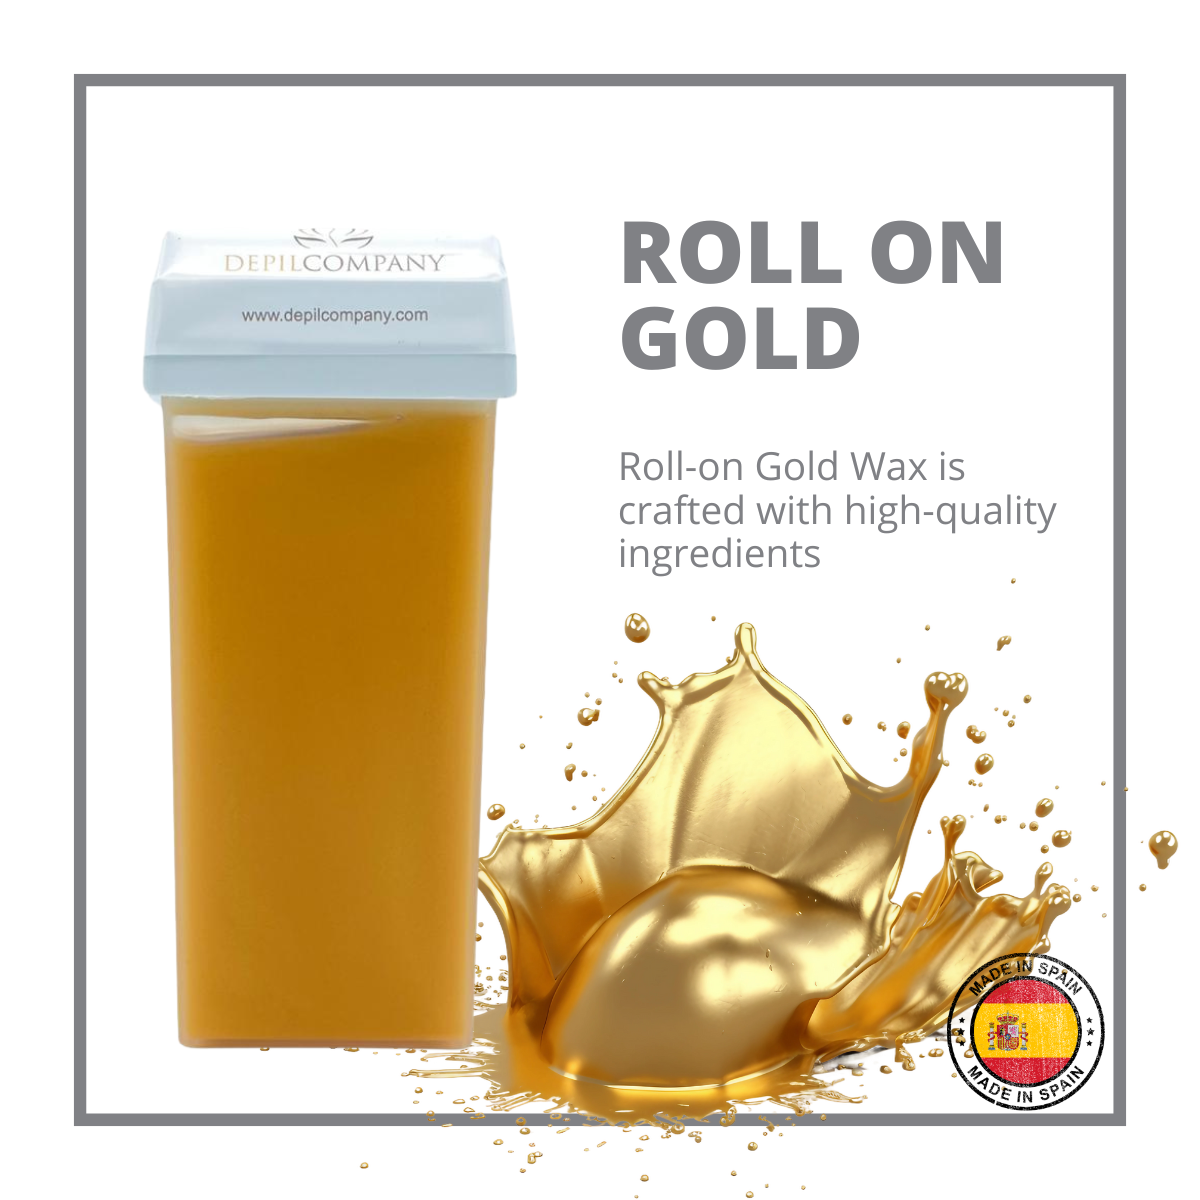 Premium roll-on gold wax for hair removal